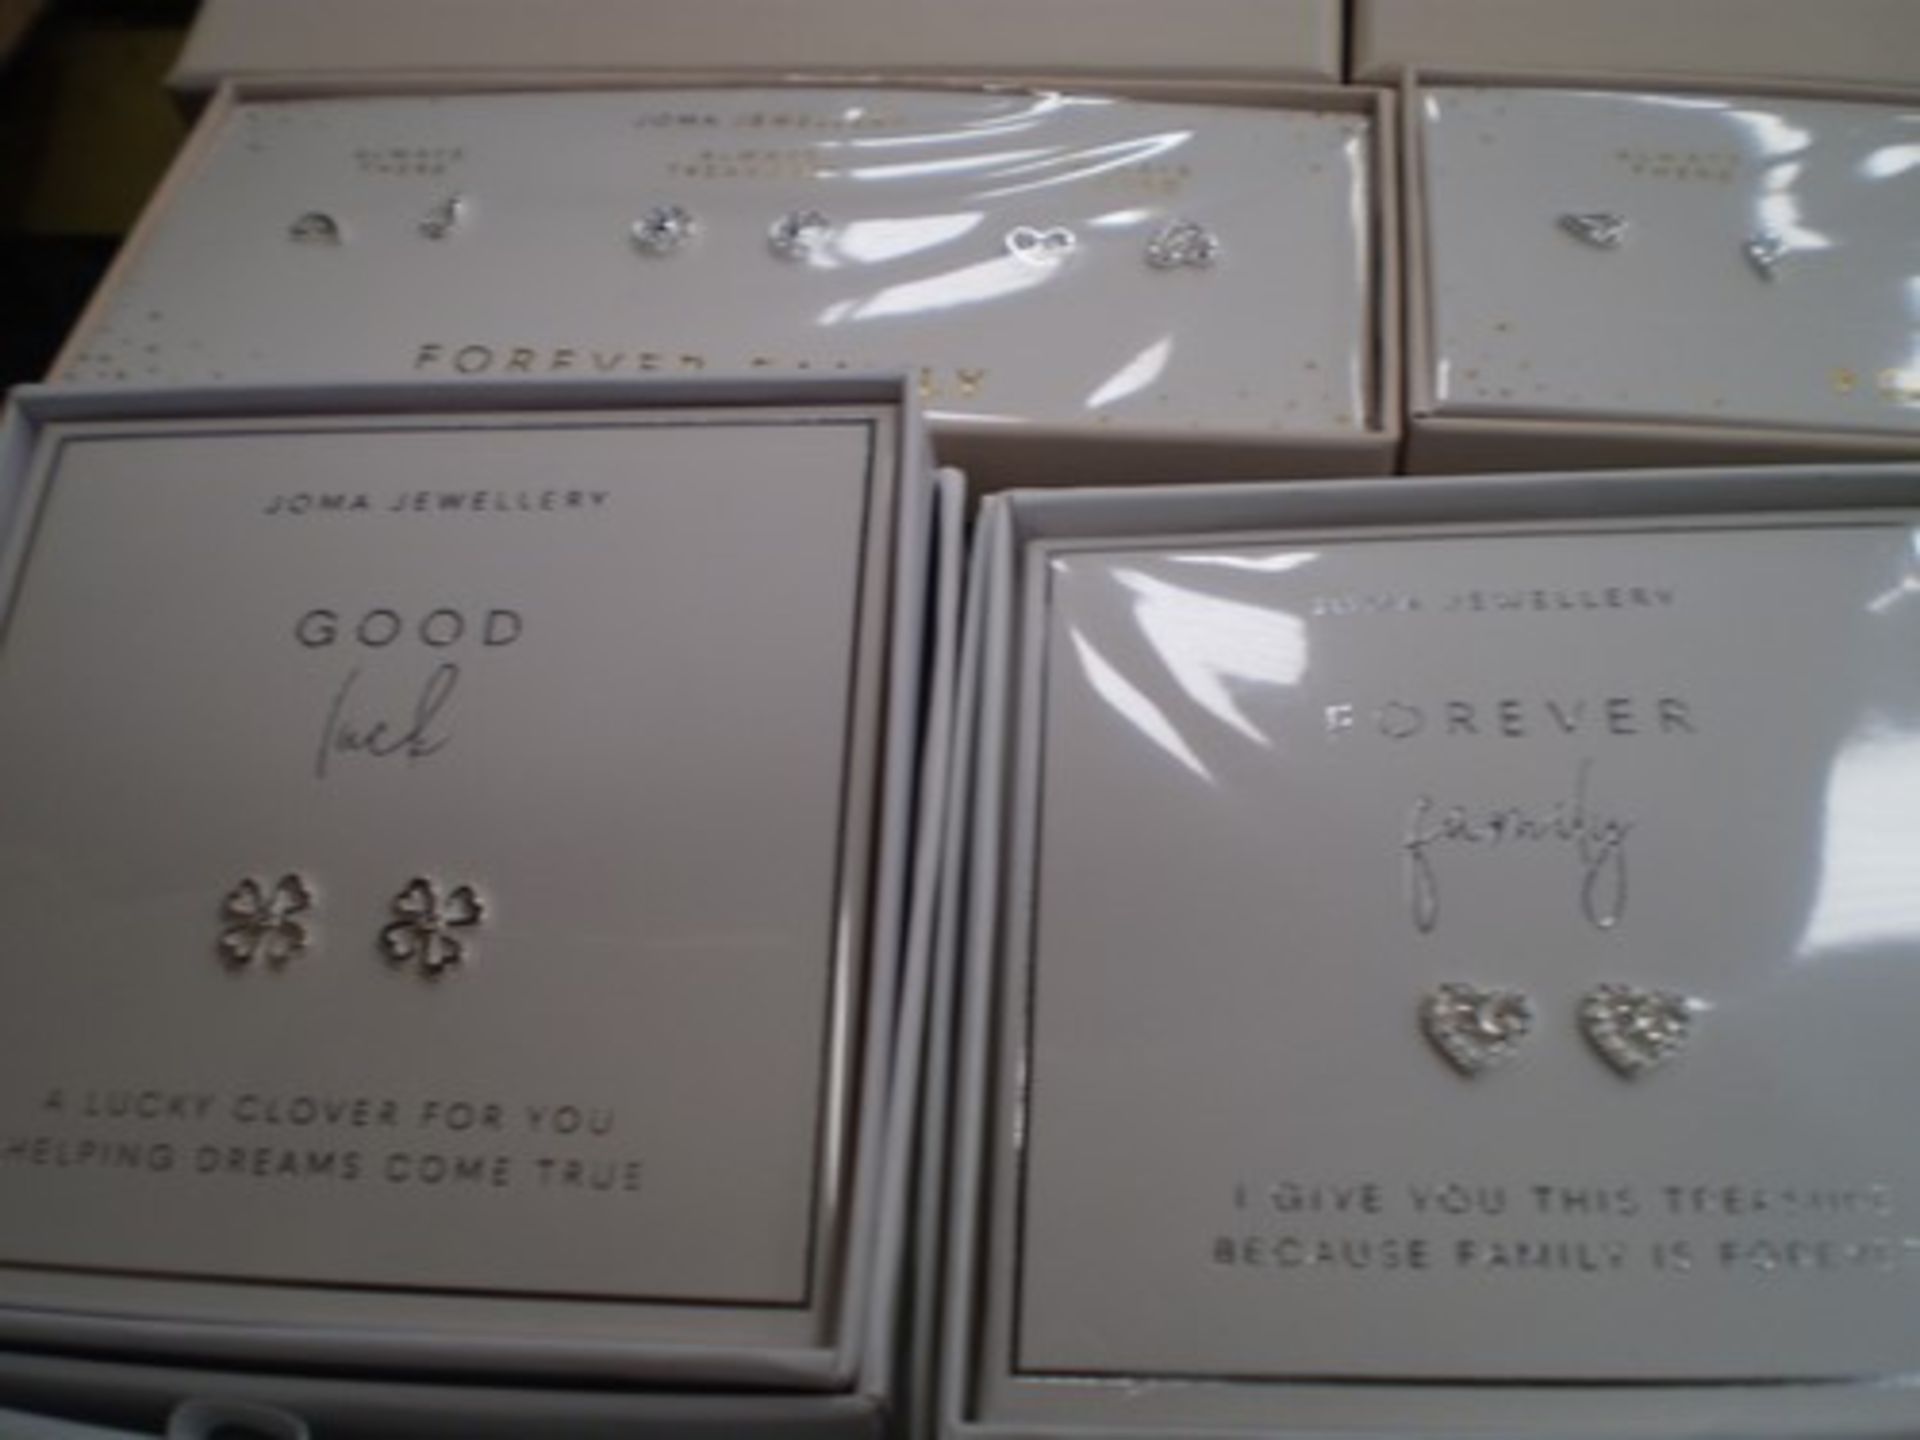 24 x gift boxed Joma jewellery, earrings, various styles and sentiments - new in box (C9C) - Image 3 of 3